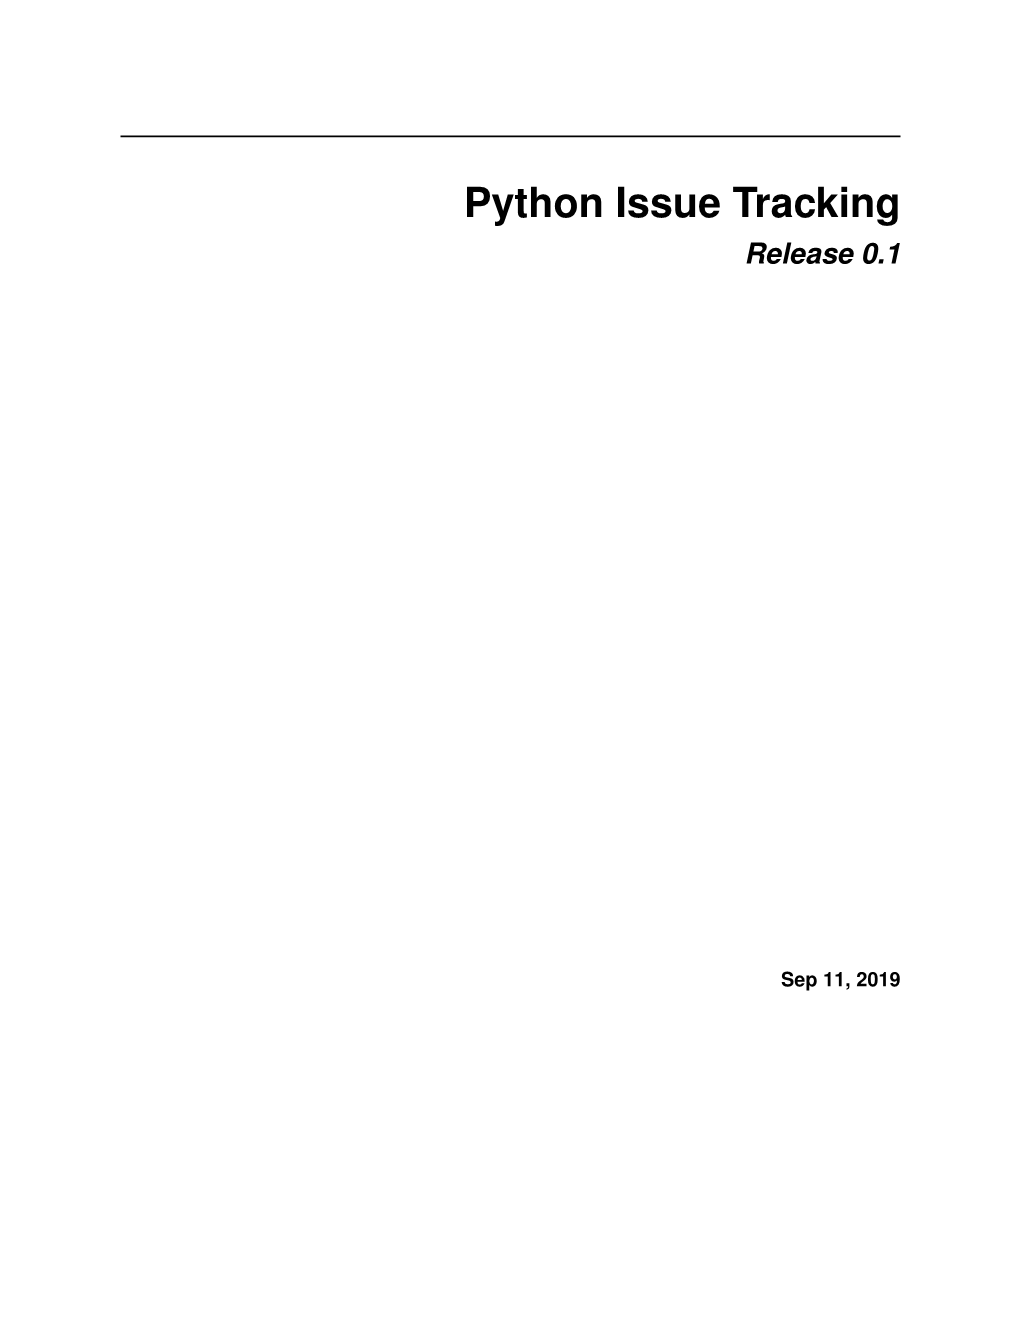 Python Issue Tracking Release 0.1